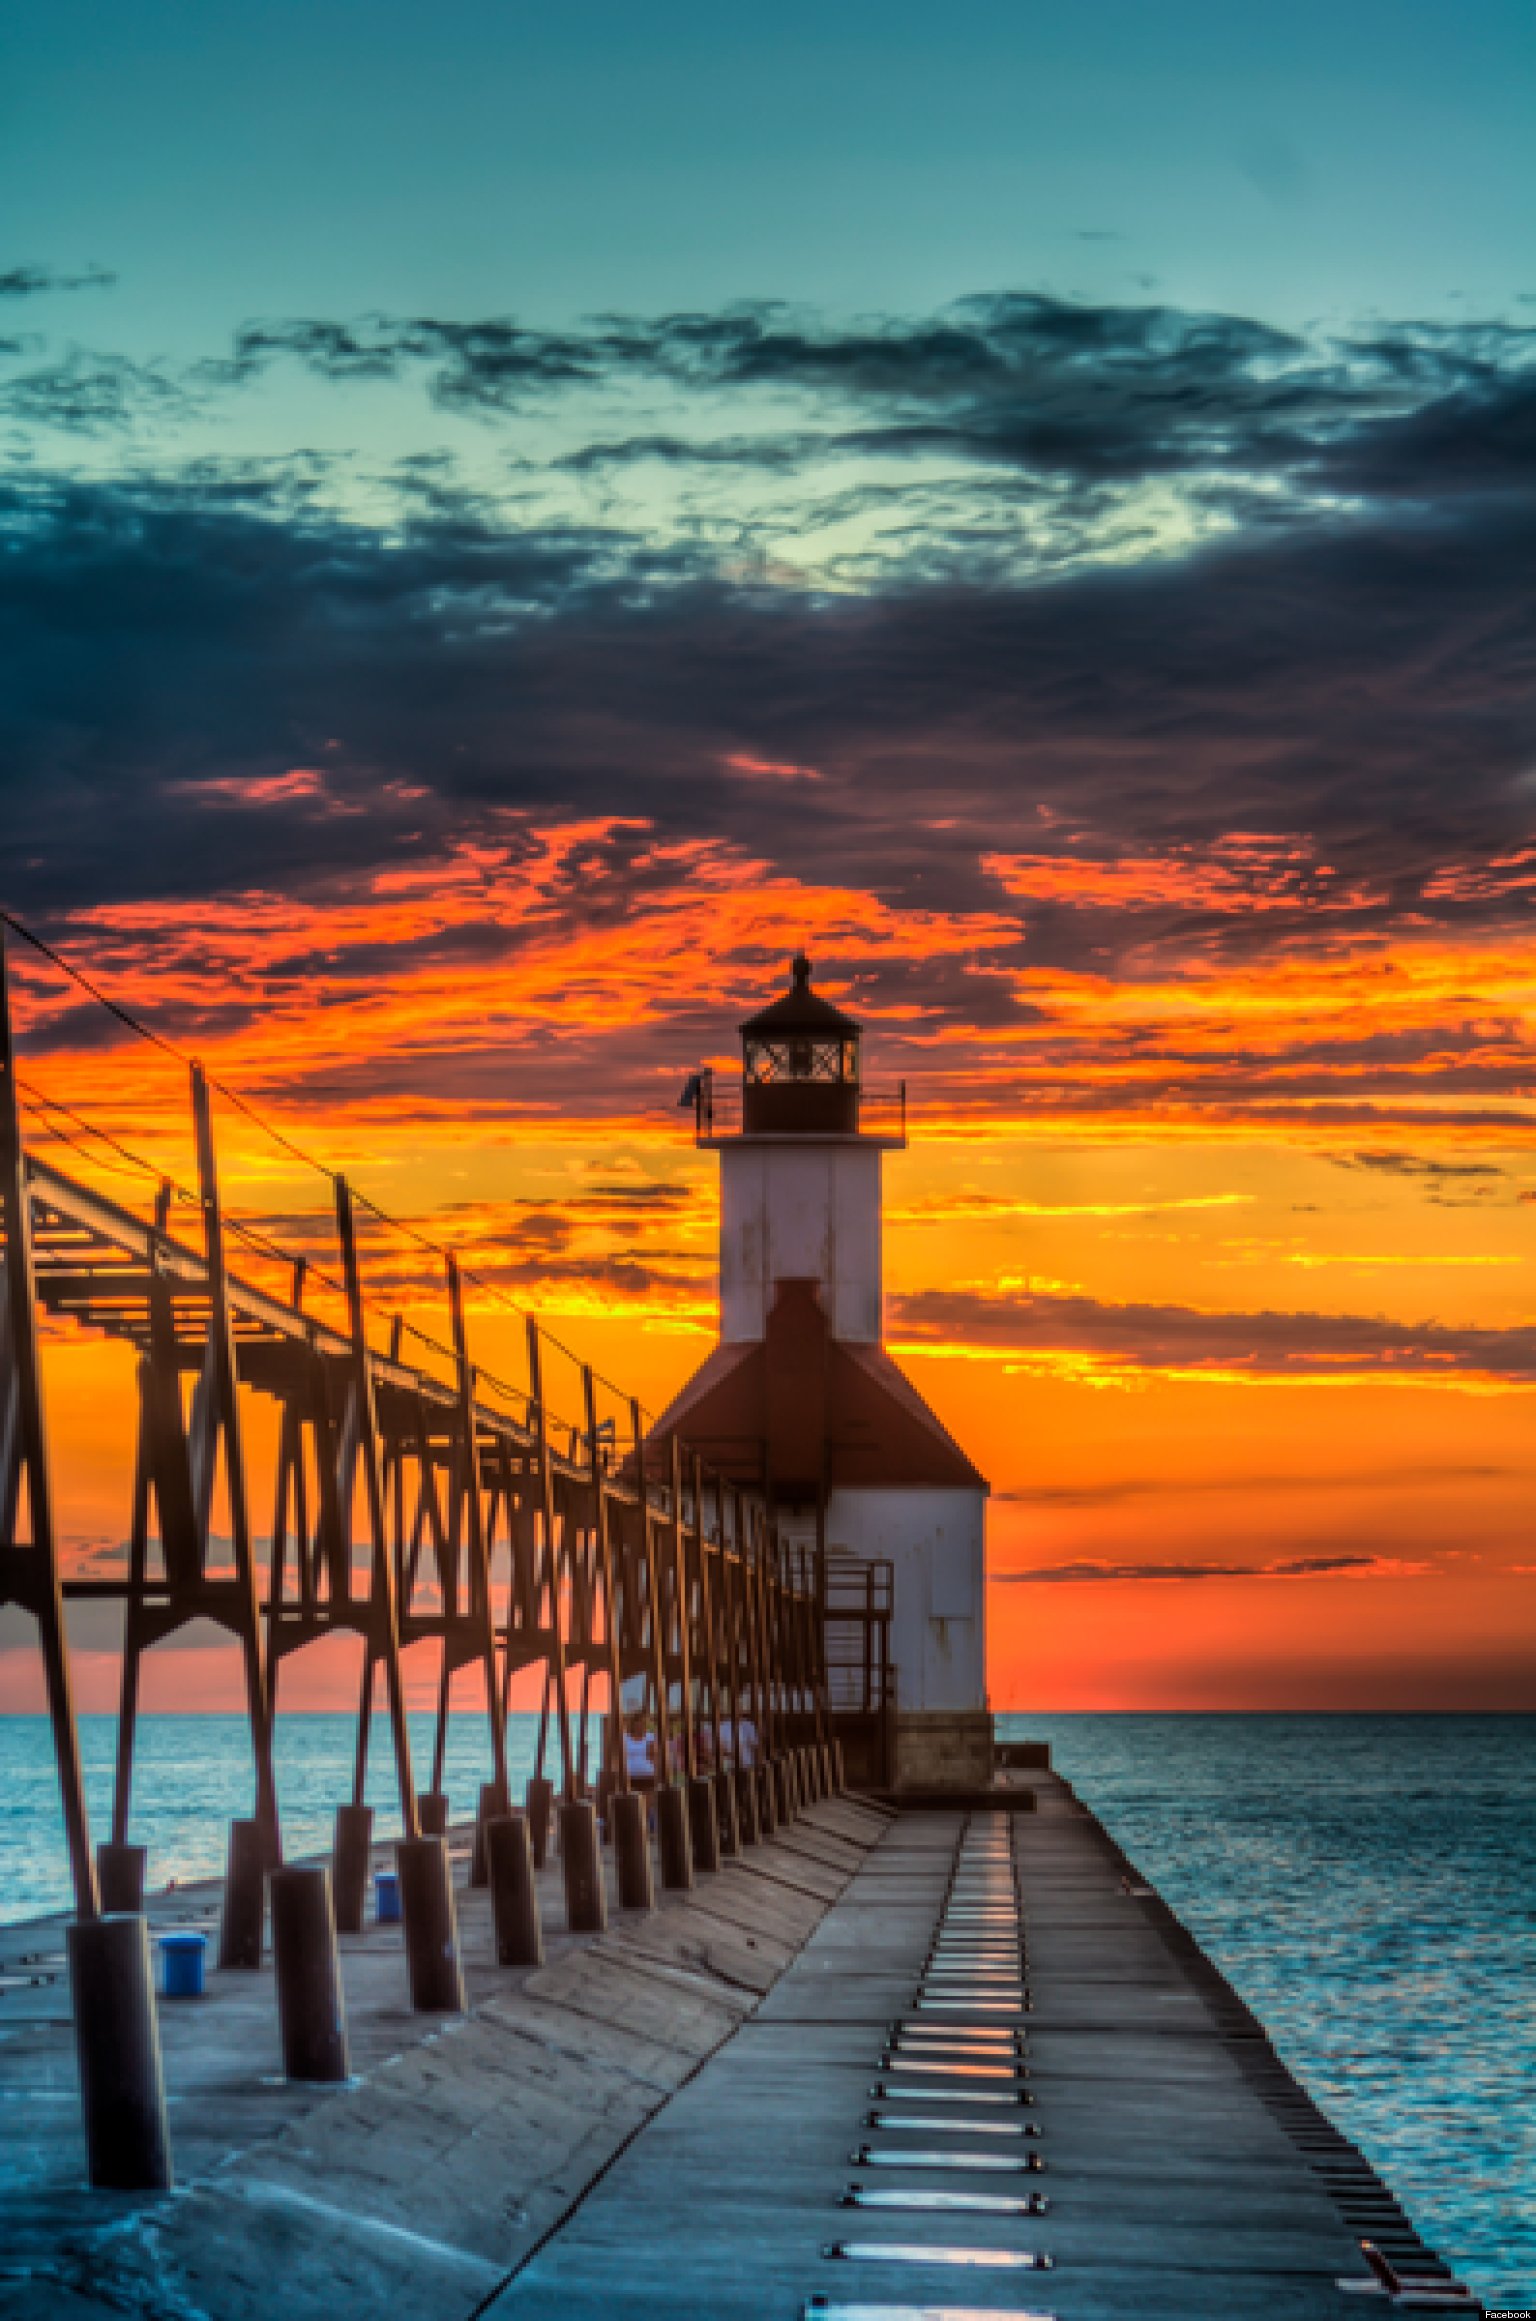 Pure Michigan Photos: Sean Chess Wins Tourism Agency's Contest To Show